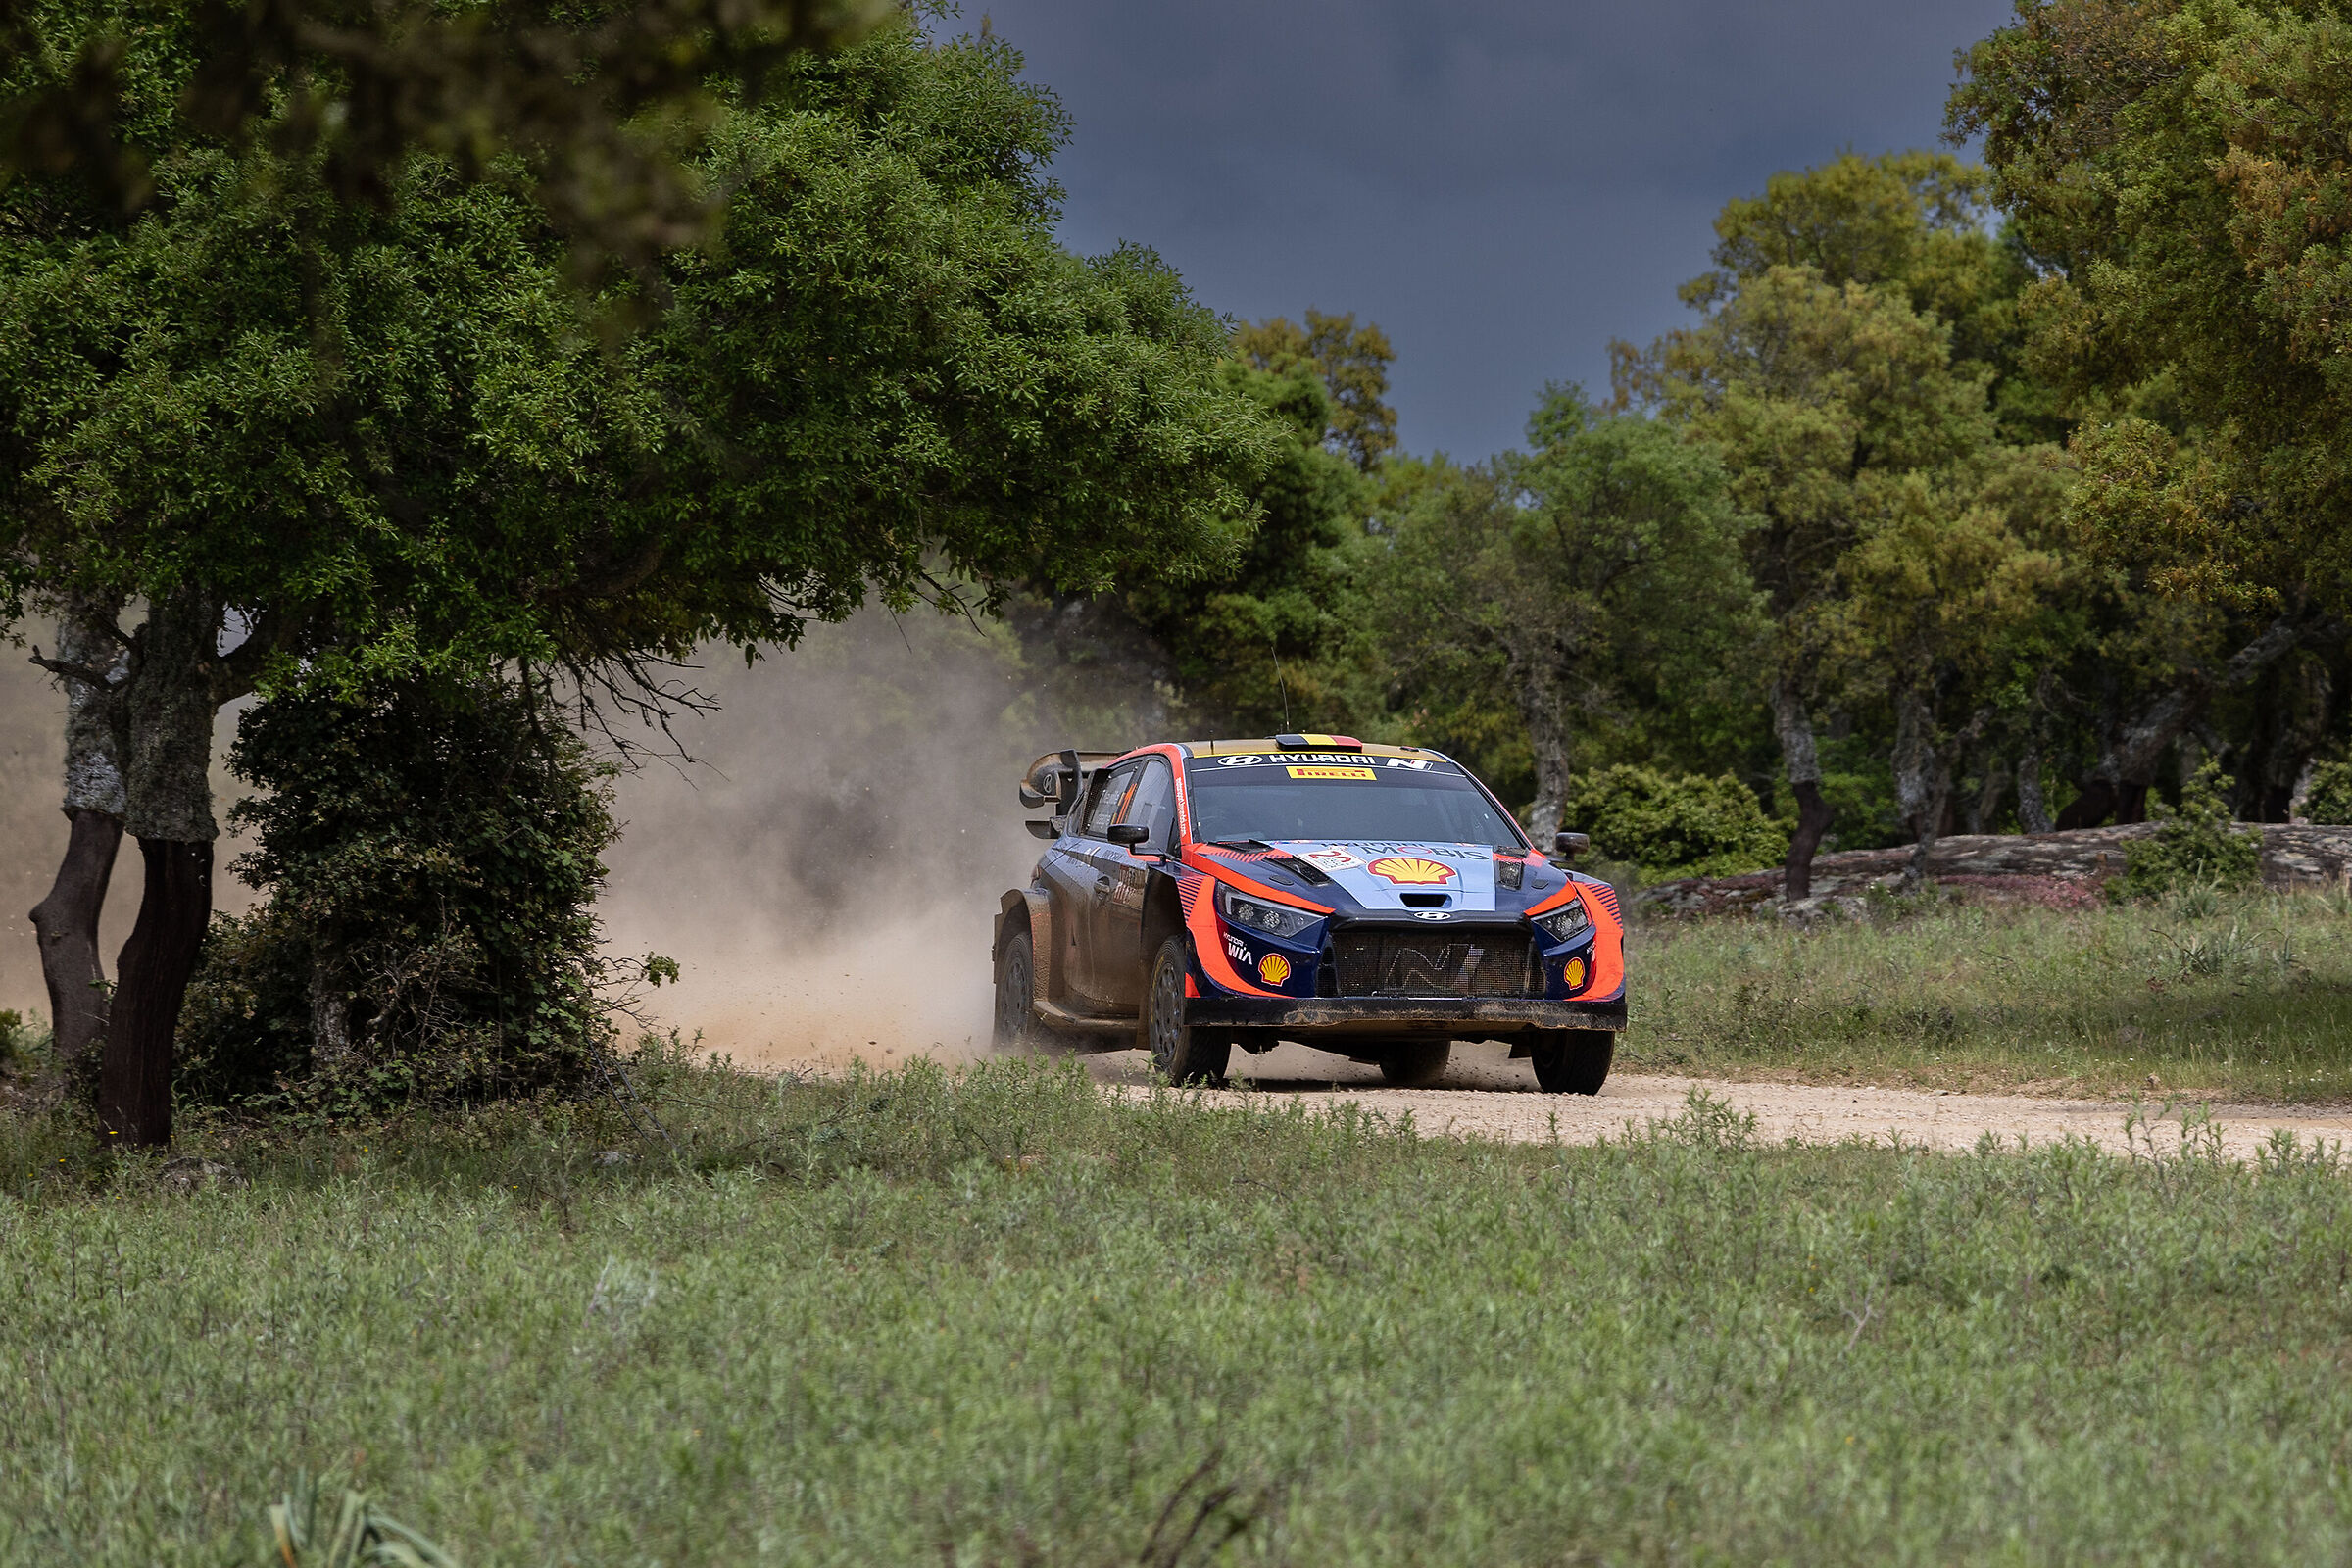 The i20 of Thierry Neuville and Martijn Wydaeghe ...